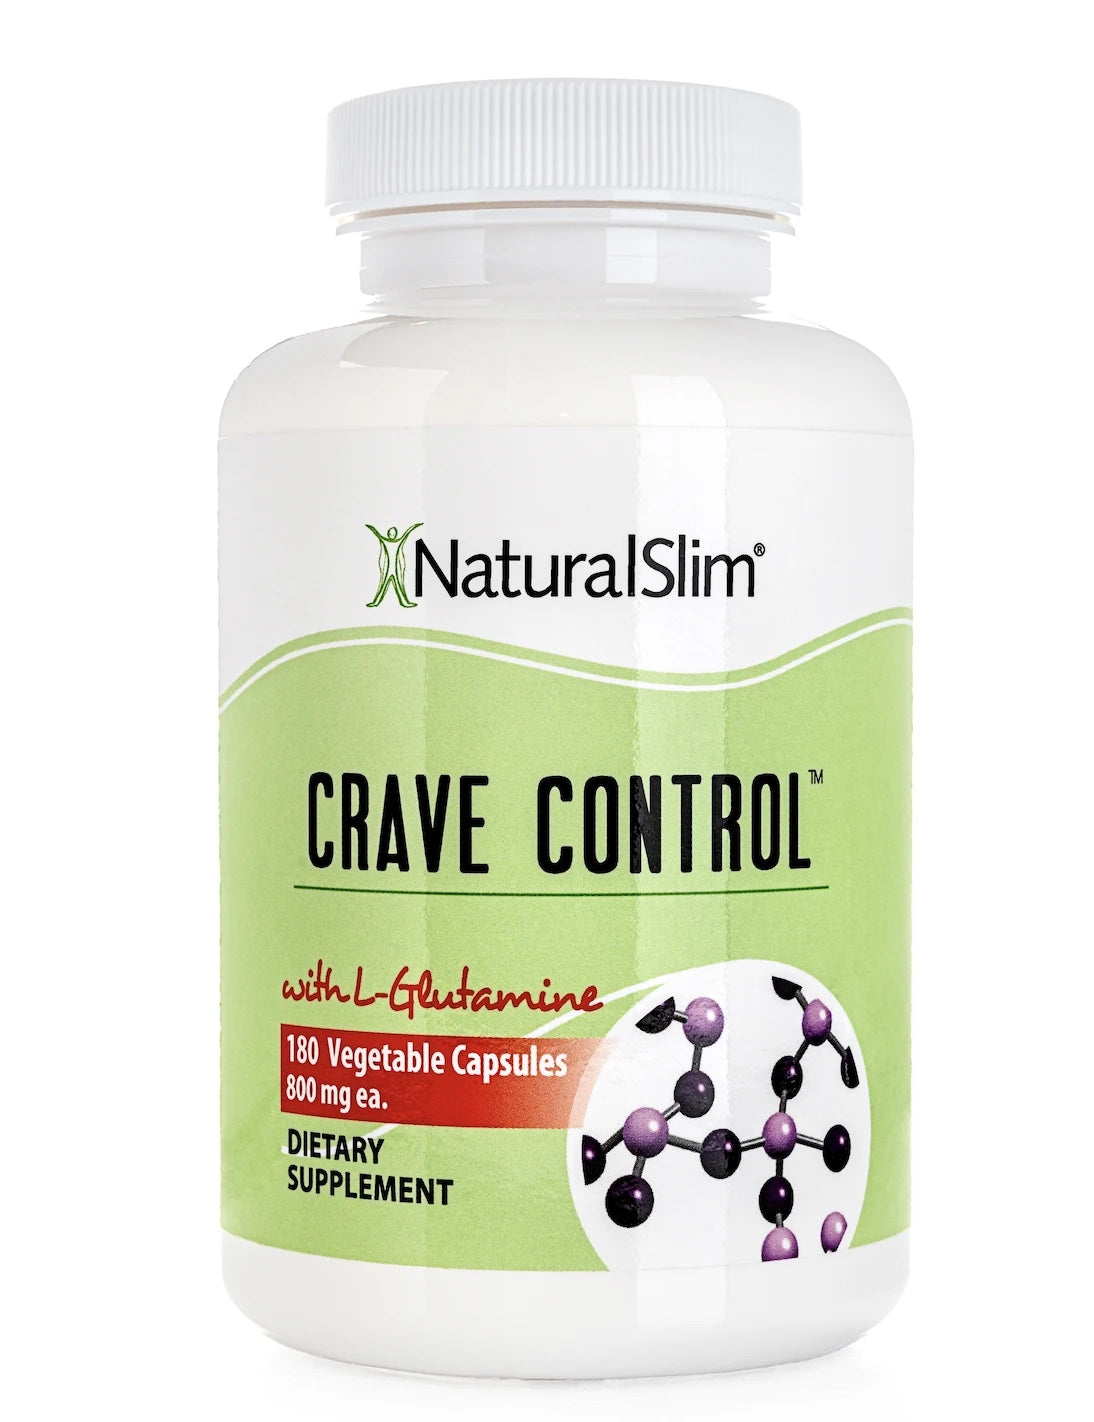 Leciclean NaturalSlim with Choline 454g